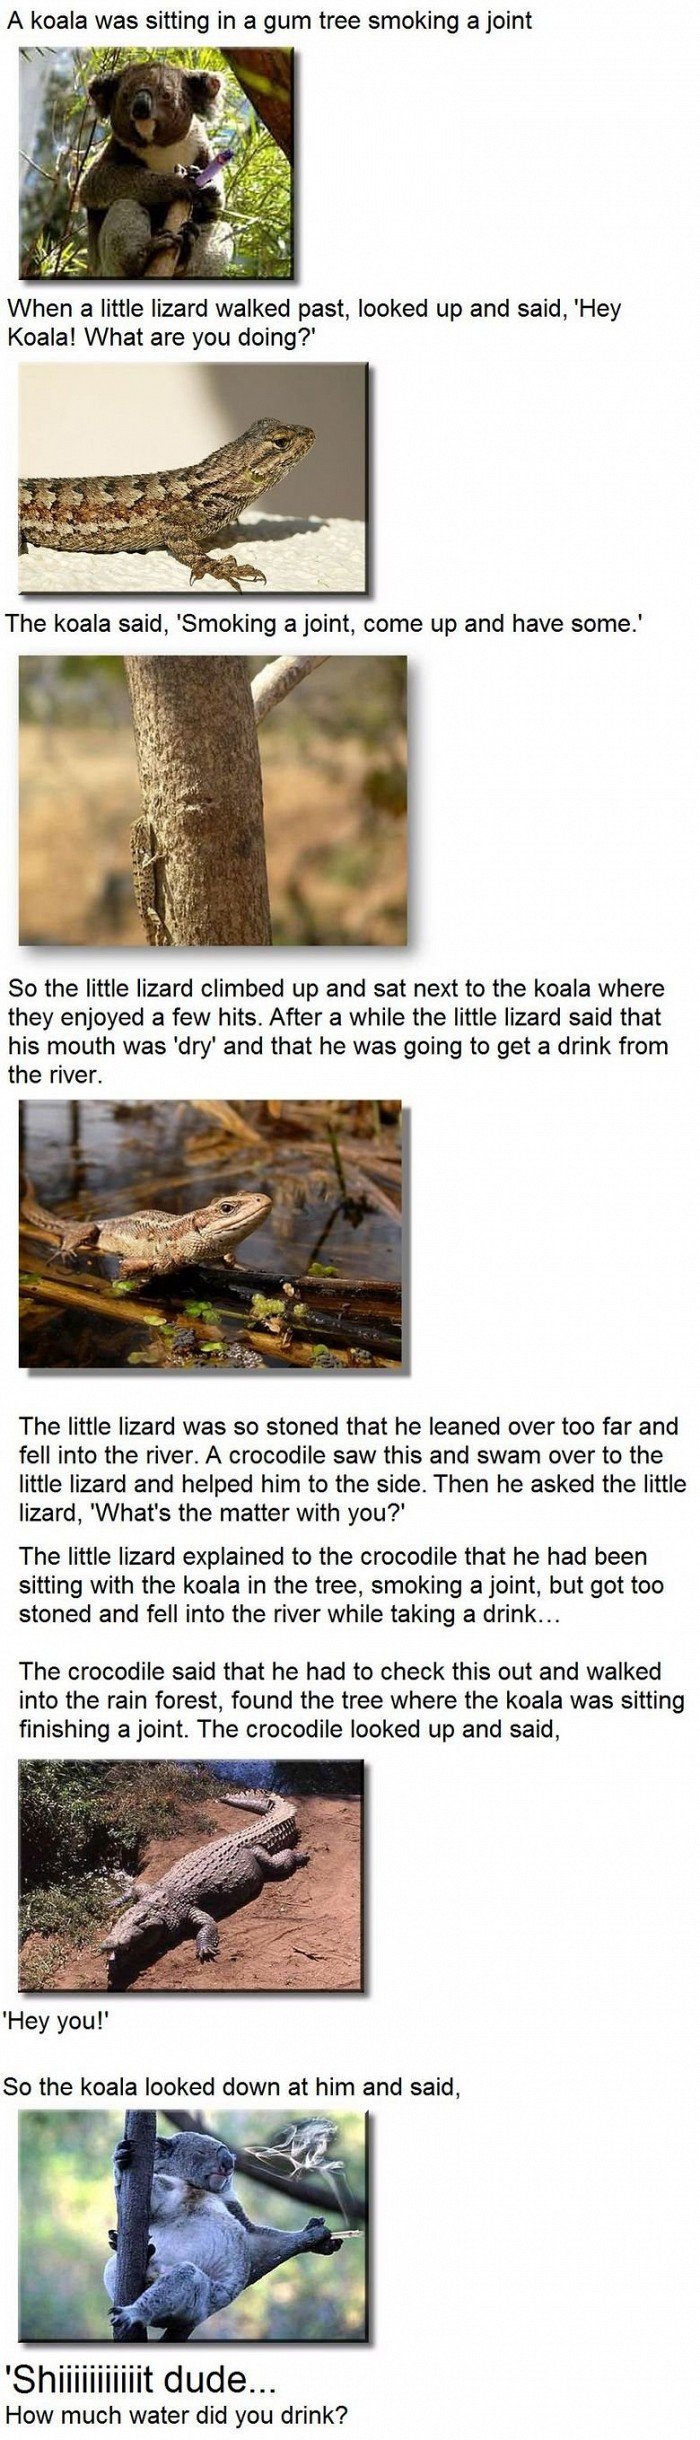 Stoned Lizzard!